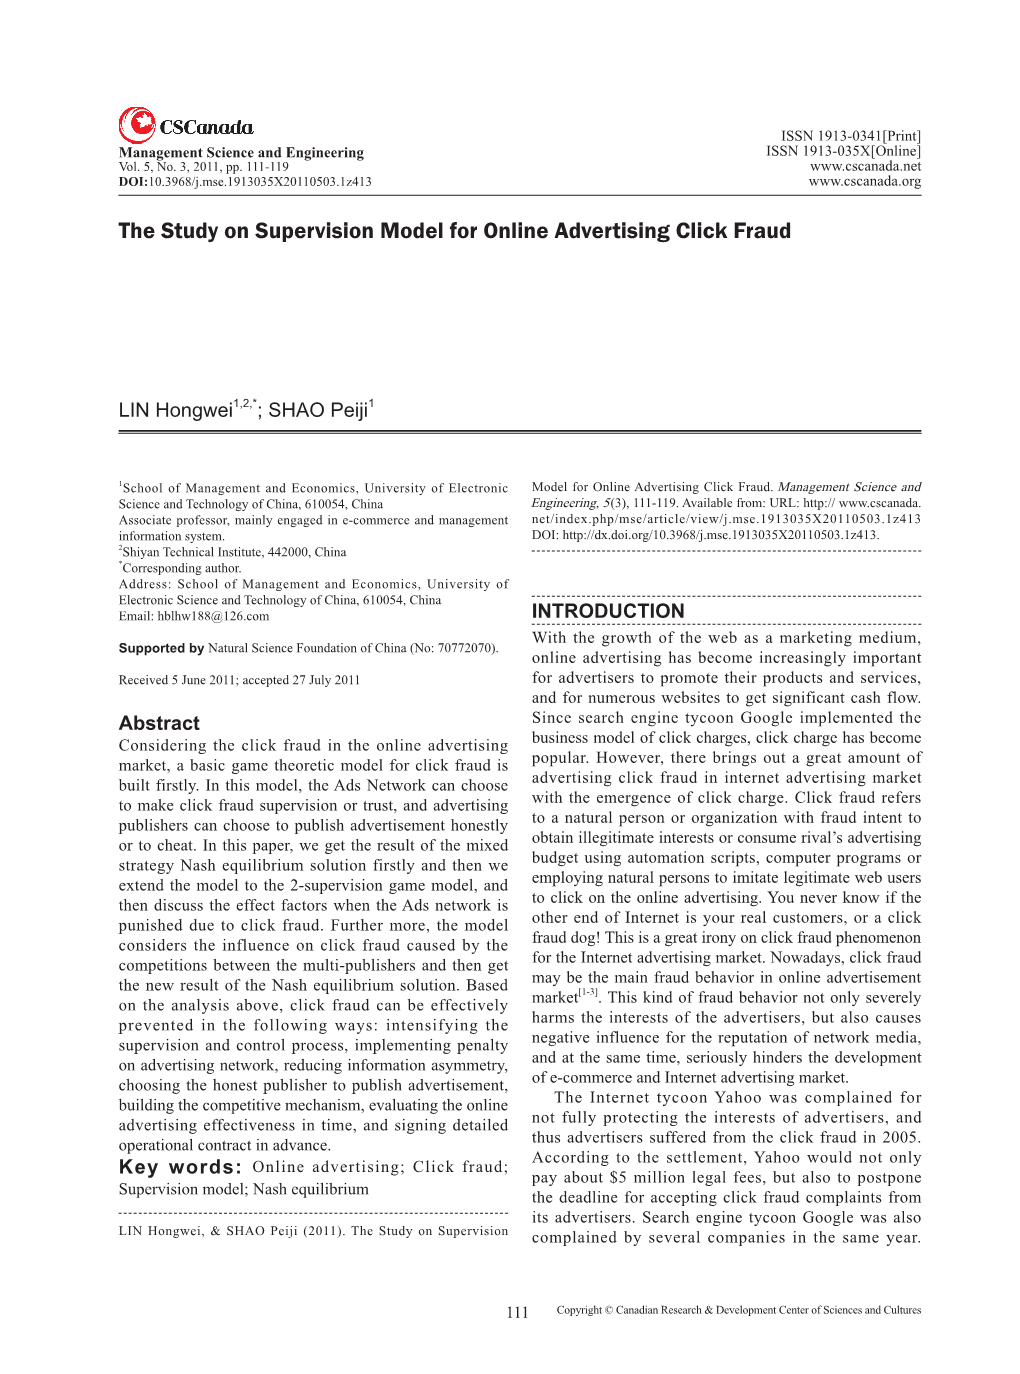 The Study on Supervision Model for Online Advertising Click Fraud